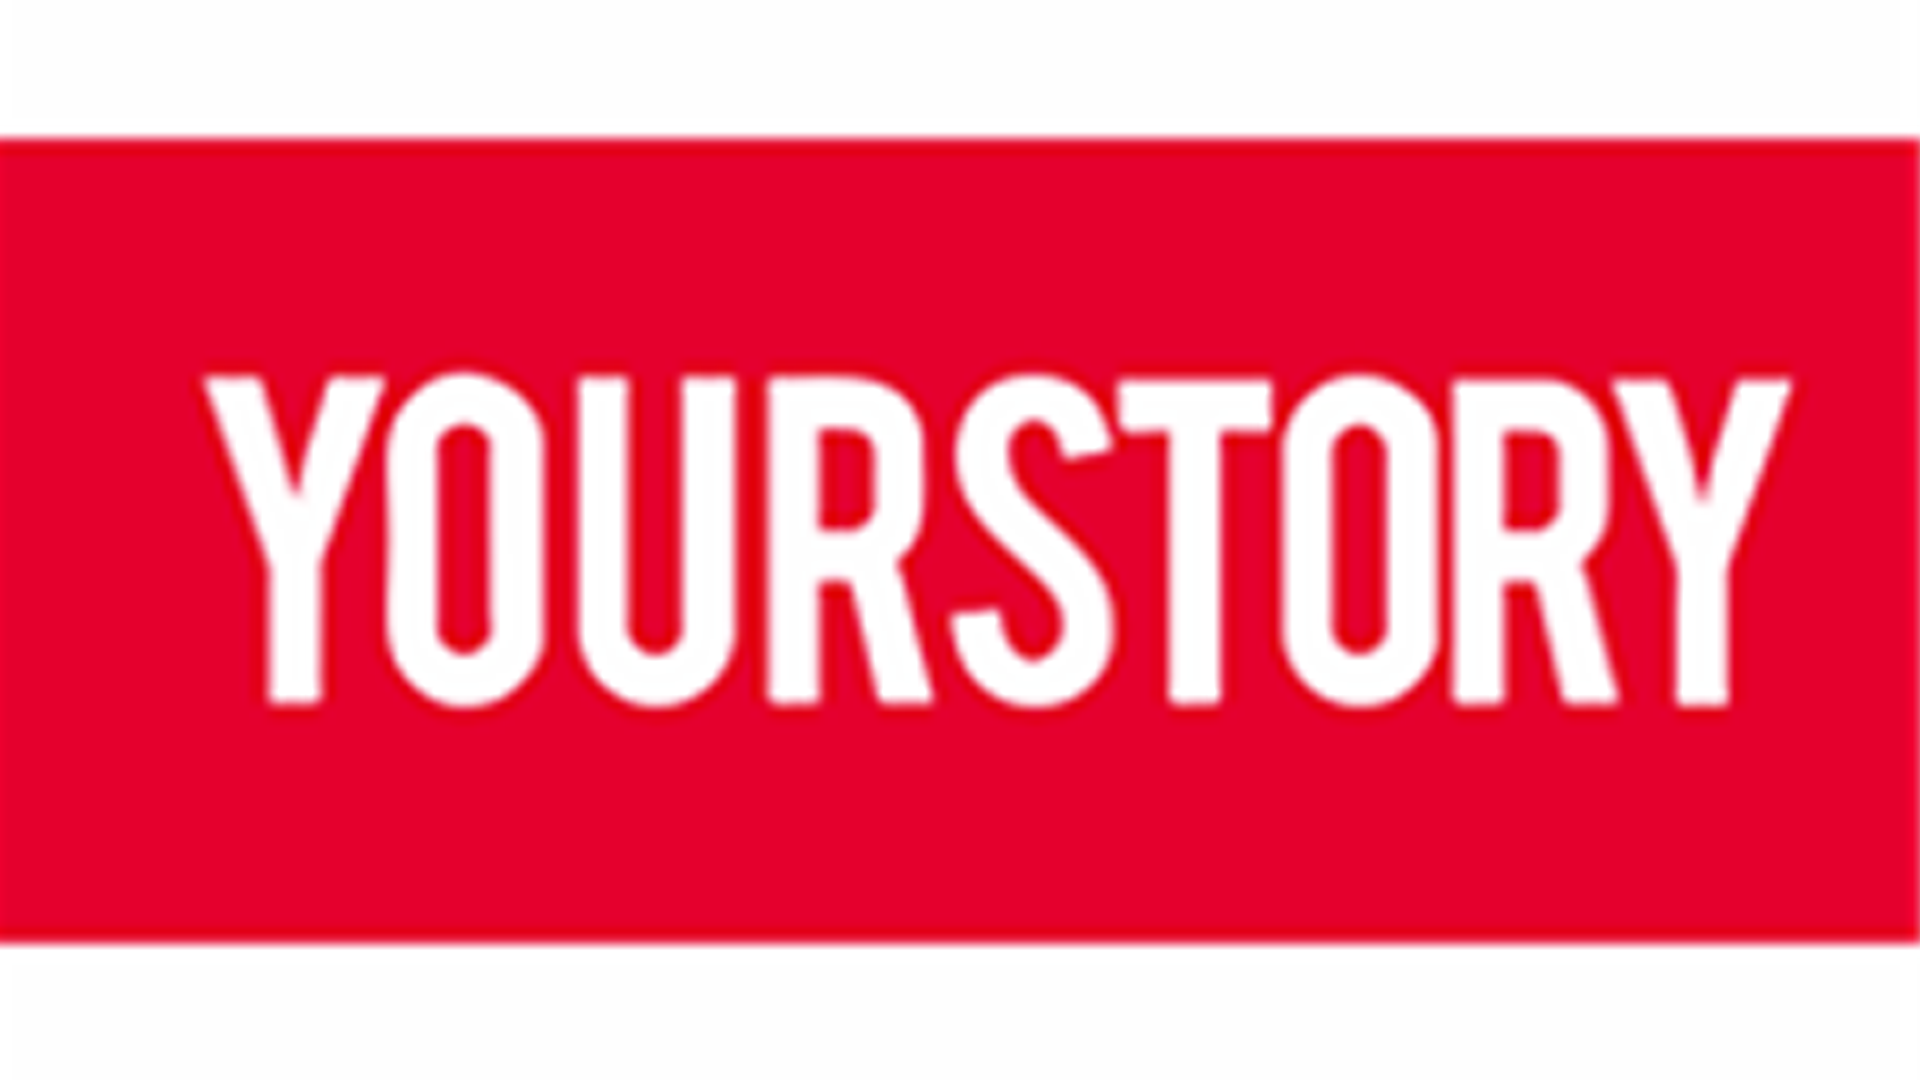 Your story logo 